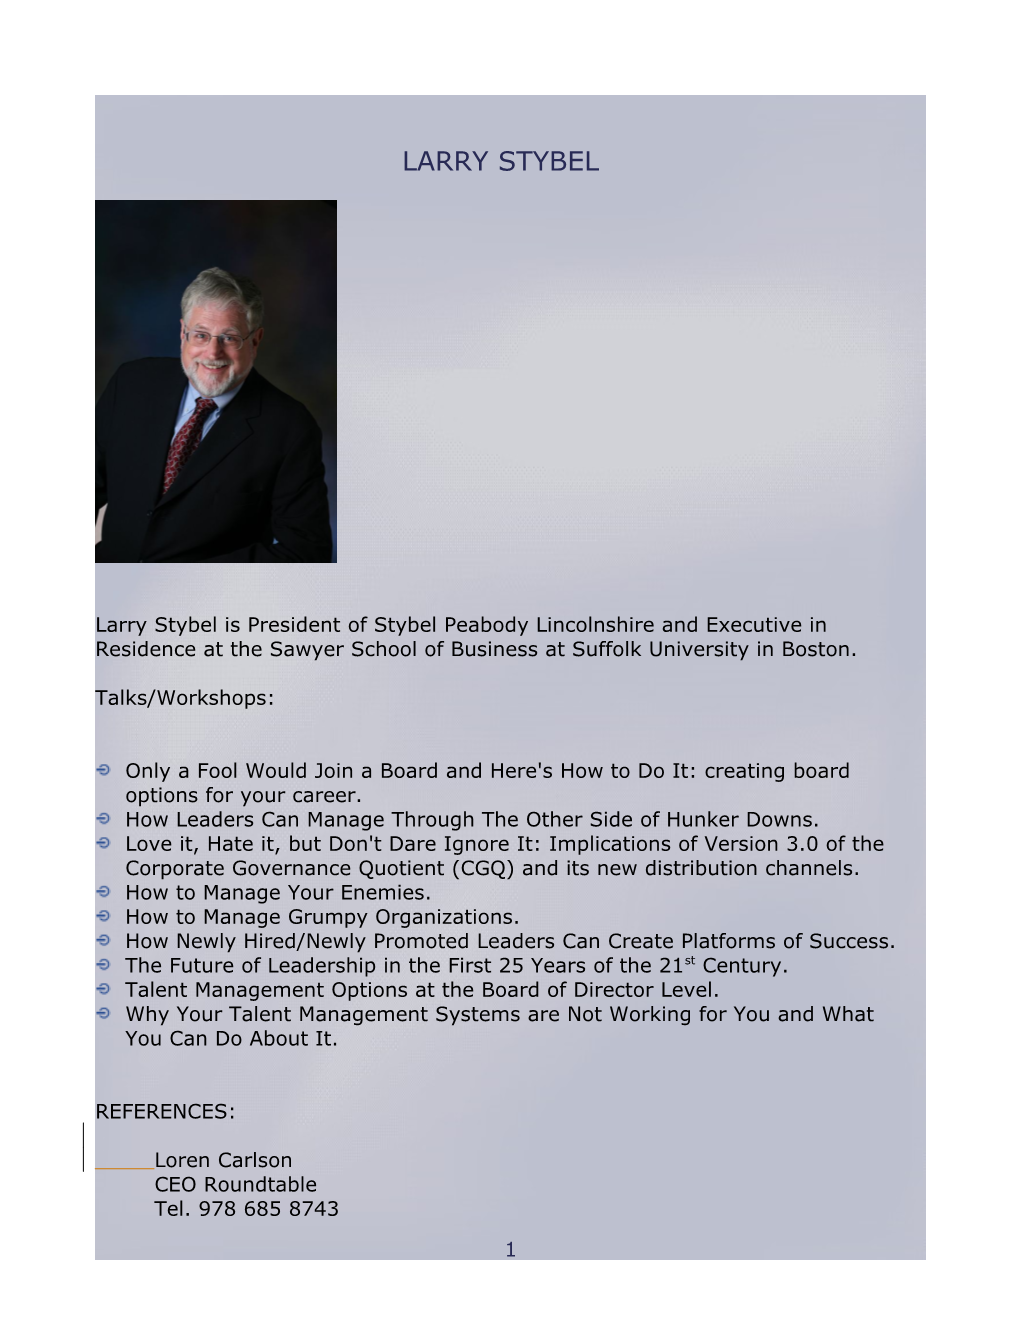 Larry Stybel Is President of Stybel Peabody Lincolnshire and Executive in Residence At